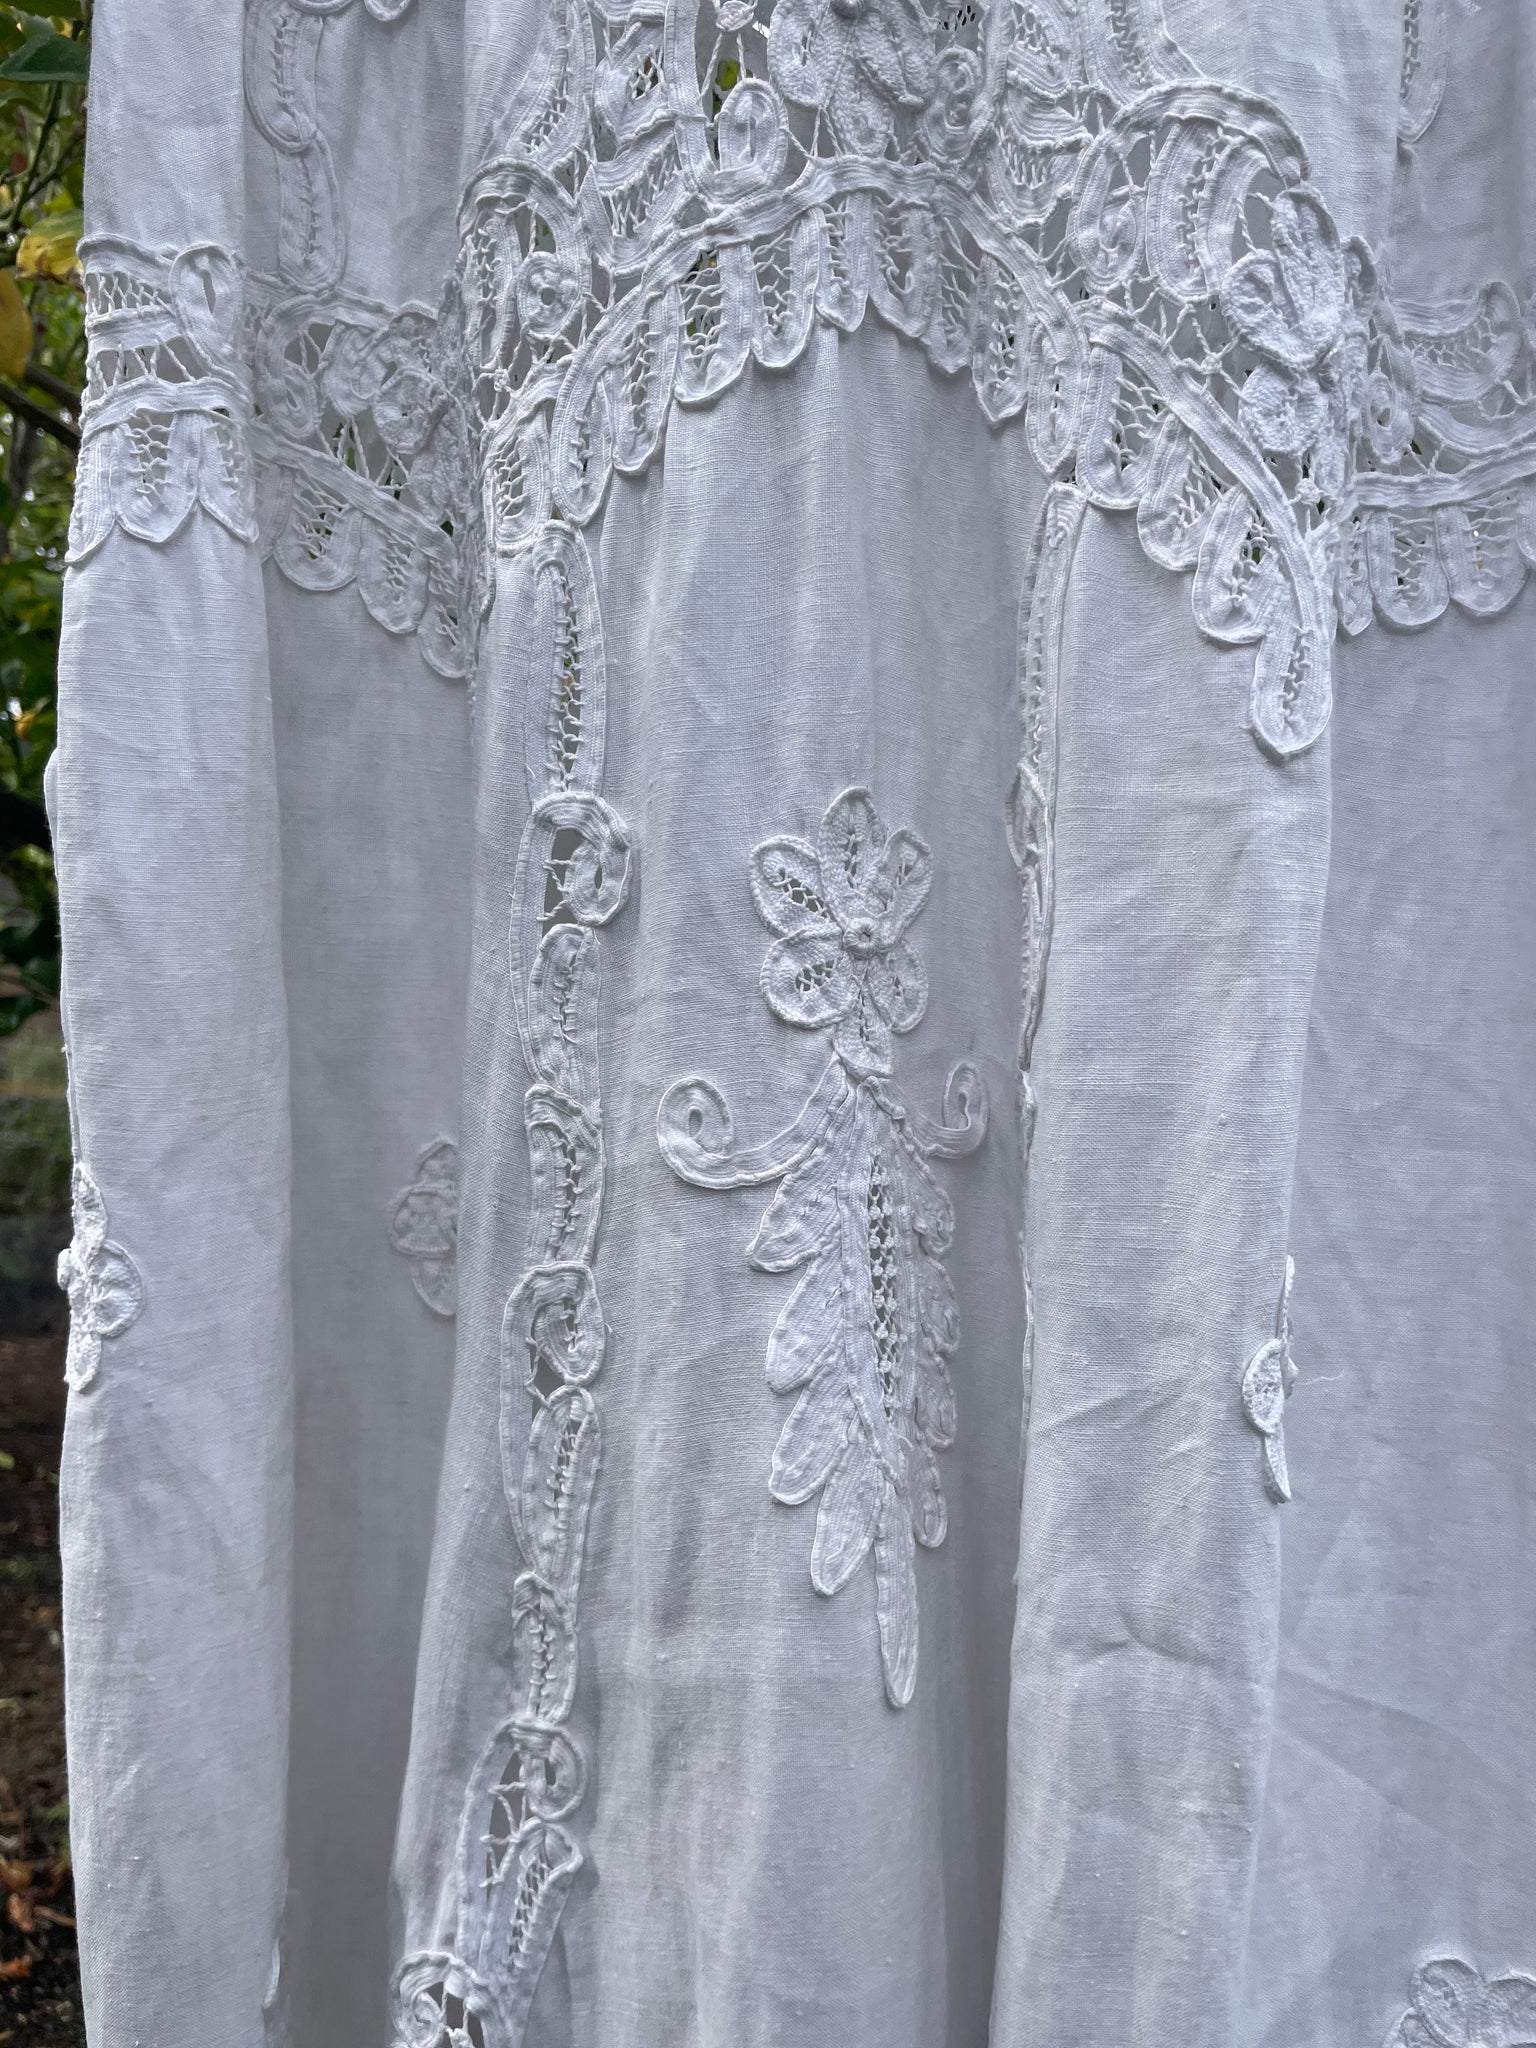 Special Turn Of The Century Hand Sewn Tape Lace & Linen Wedding Gown